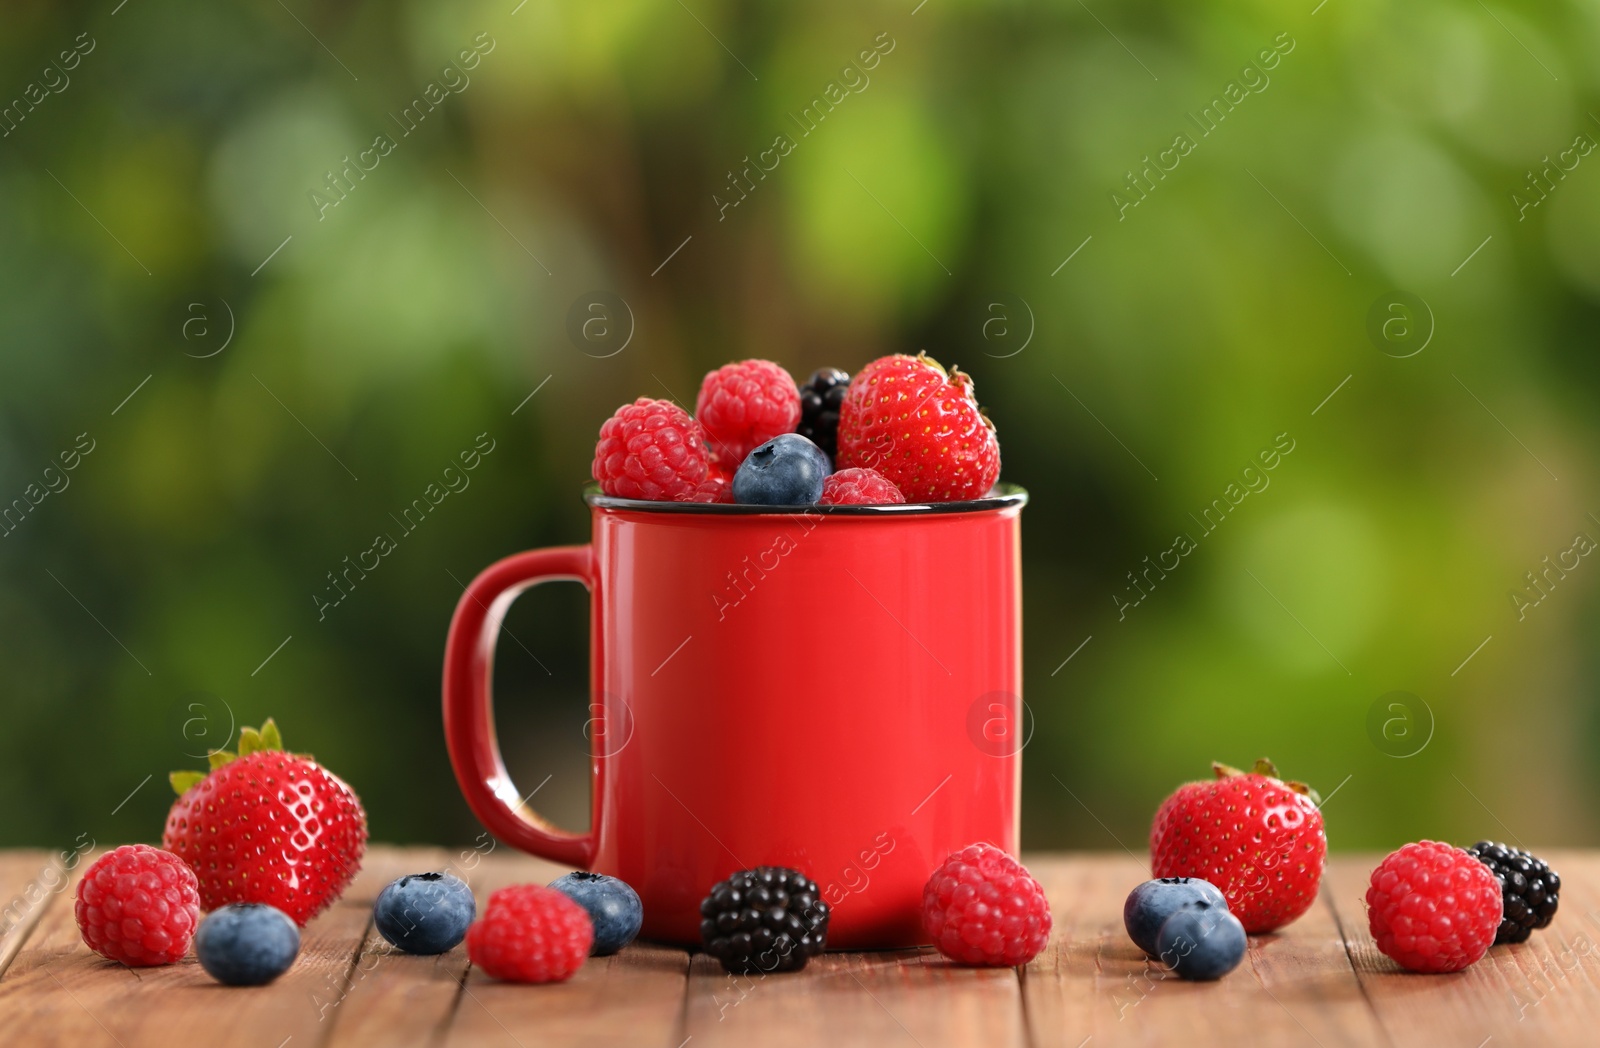 Photo of Mug with different fresh ripe berries on wooden table outdoors